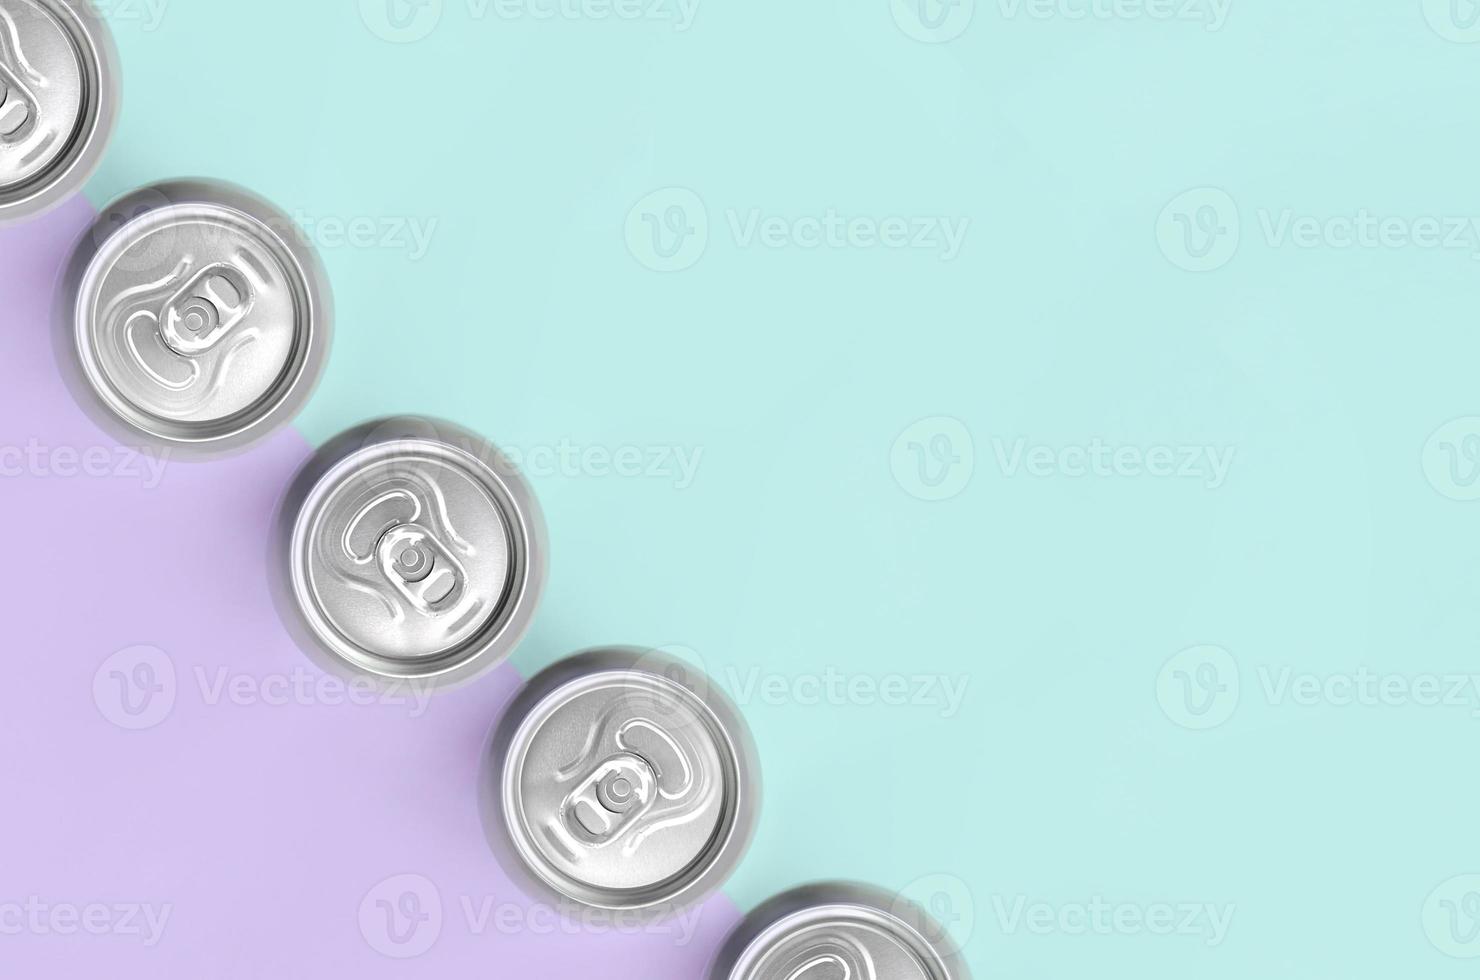 Many metallic beer cans on texture background of fashion pastel violet and blue colors paper in minimal concept photo